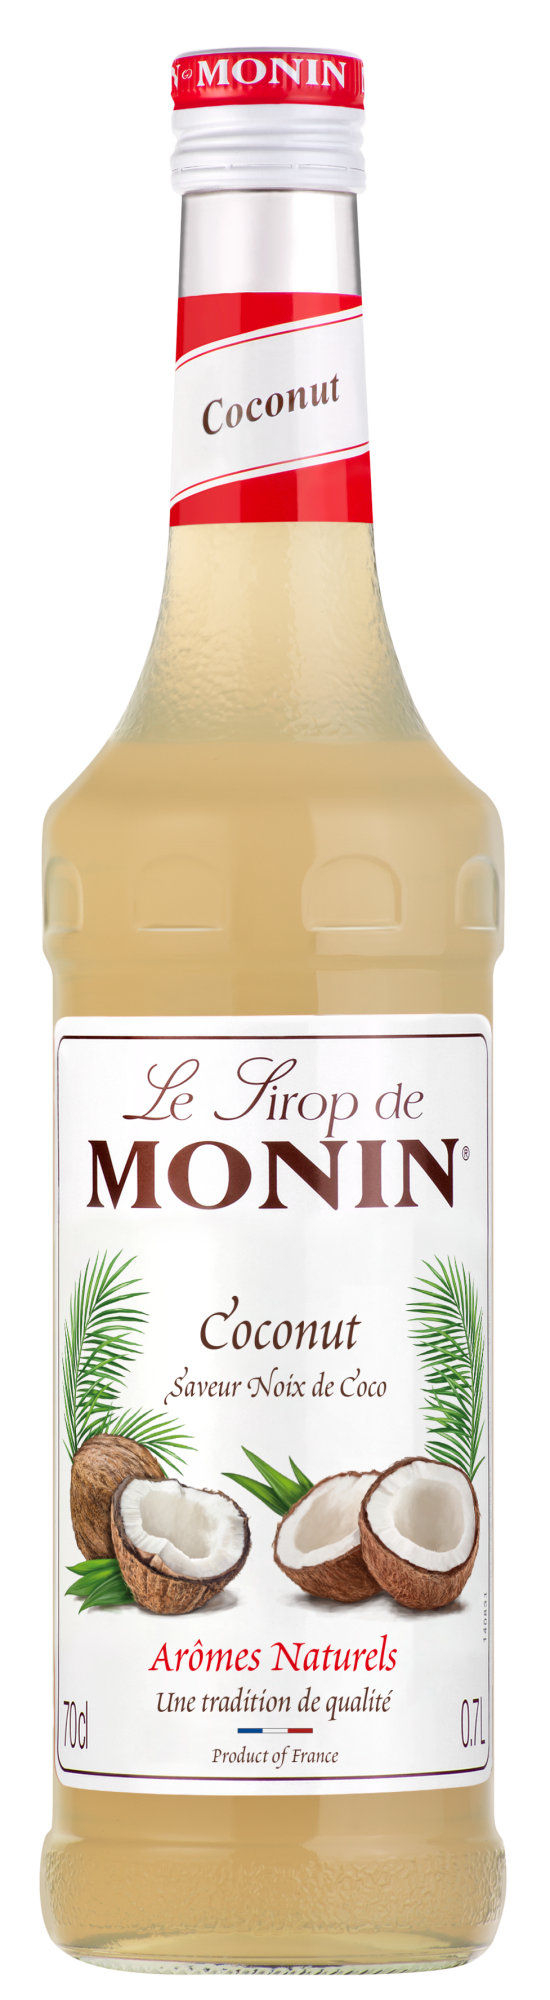 Buy MONIN Coconut Syrup. It incorporates the rich, creamy, indulgent taste, aromas and textures associated with coconuts.